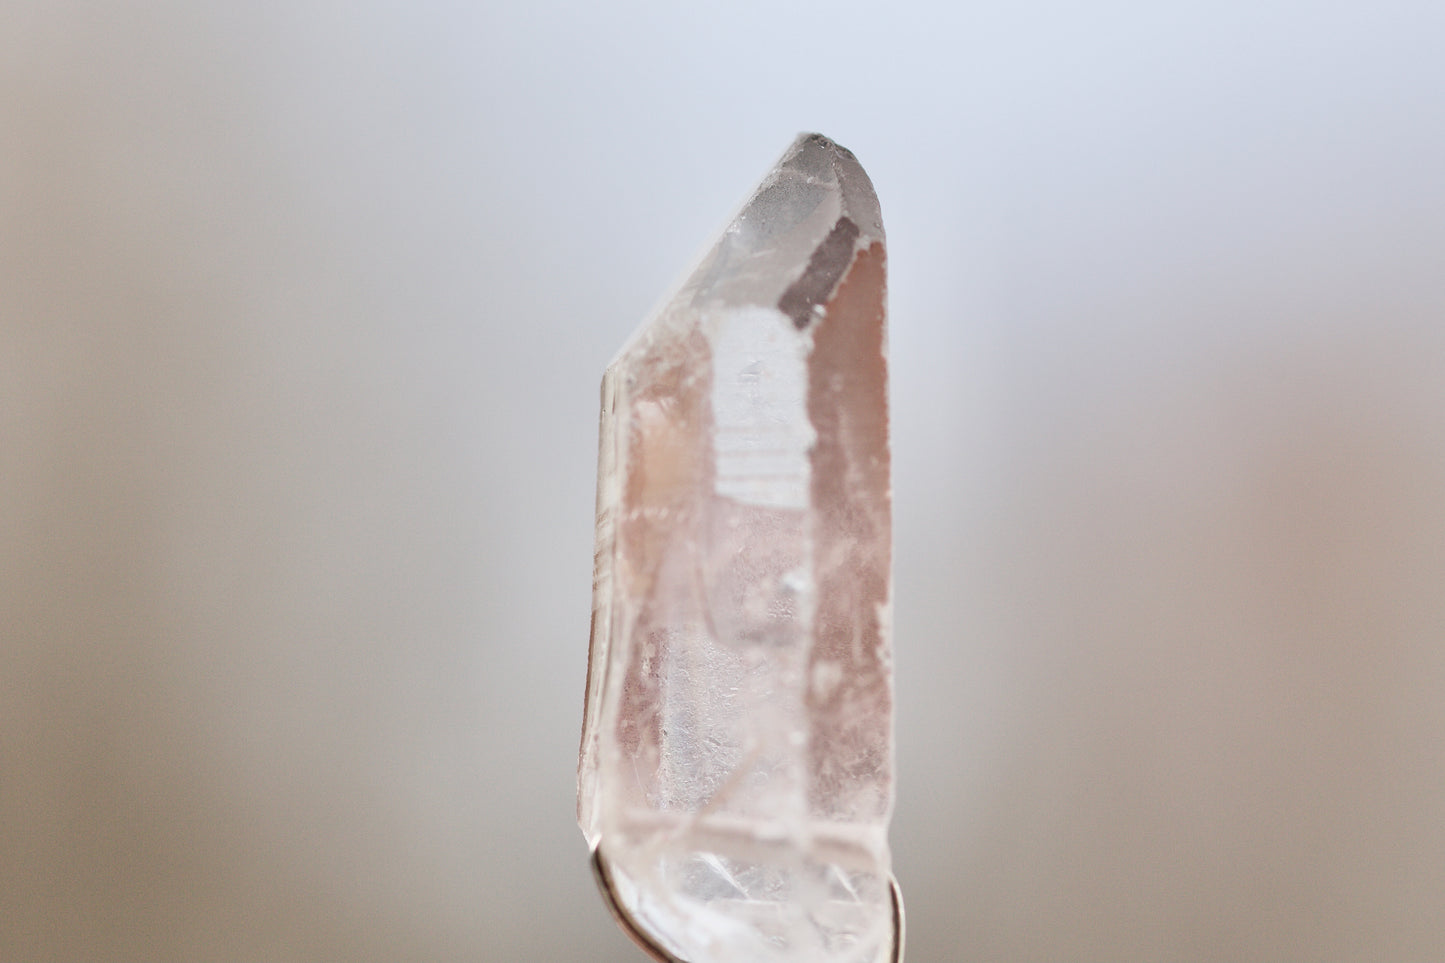 Clear Quartz Shovel Crystal with Pink Mineral Coating, Rainbow, and Future Time Link, Kunzite, and Sterling Silver Pendant Necklace